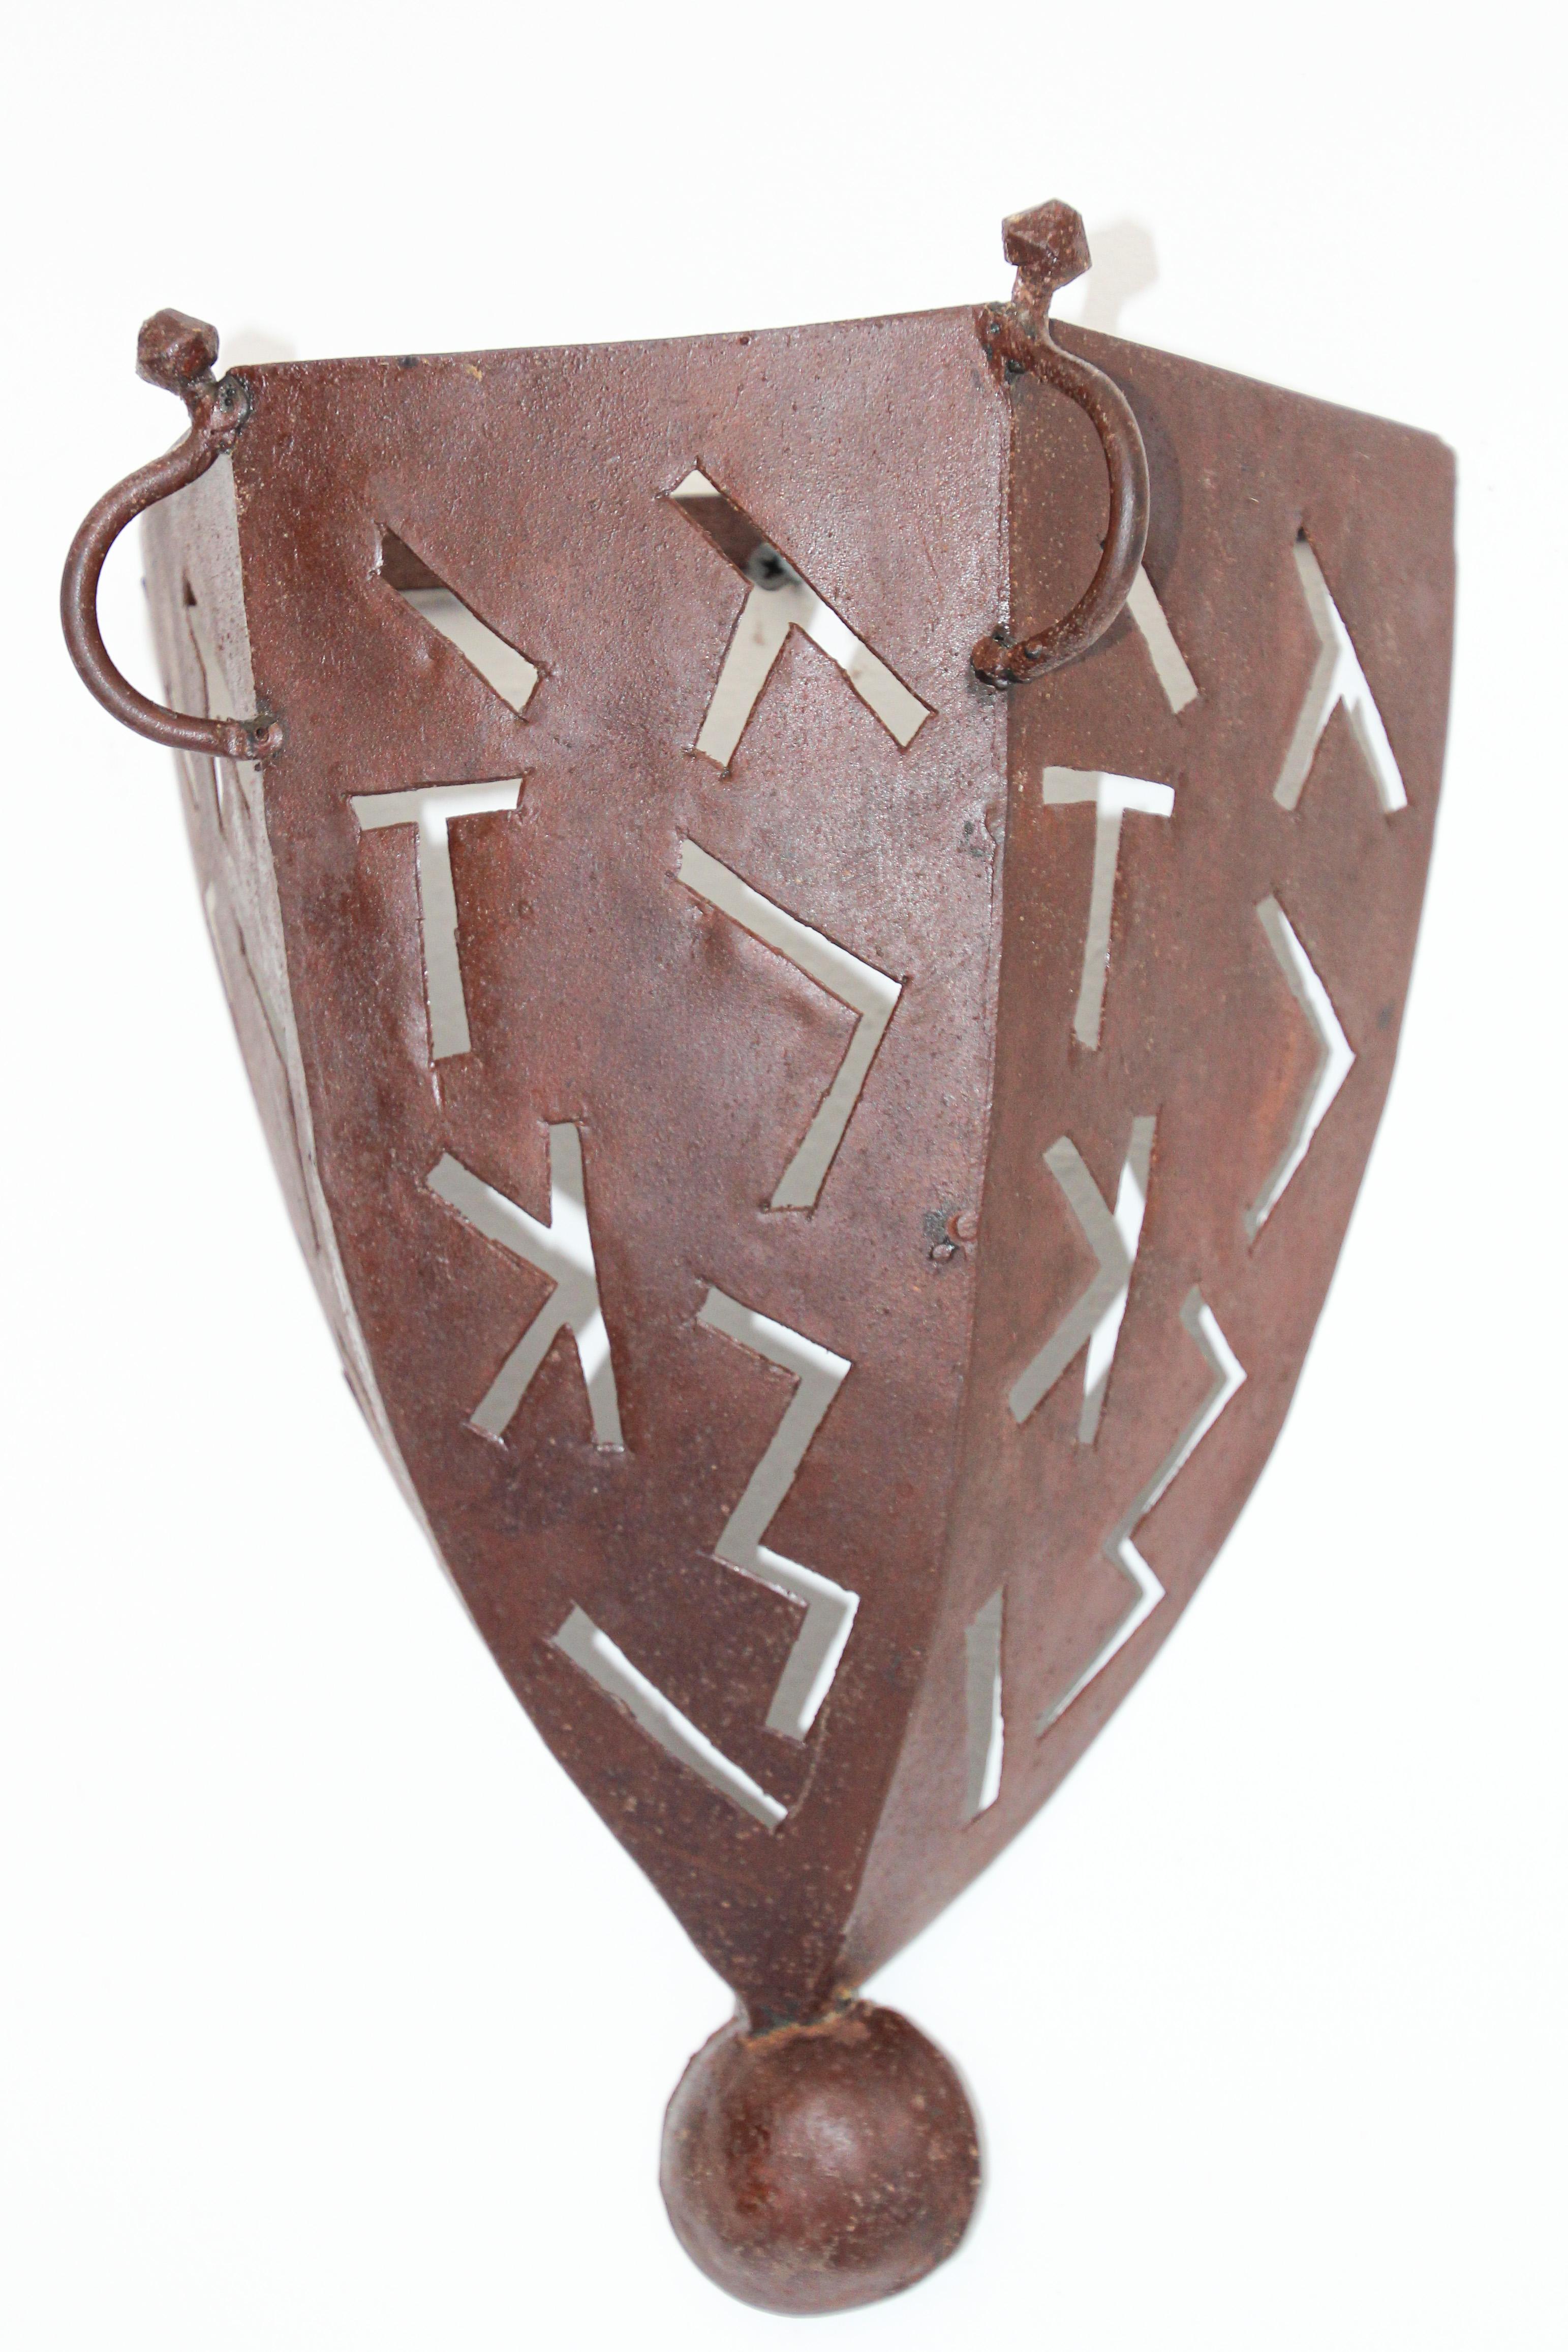 African Tribal Art wall shade metal sconce shade.
These Moroccan Art pieces could be used as wall lamp shade or just art work.
Iron frame with tribal handcut designs.
These lamp shades sit over your existing wall light fitting.
There are no